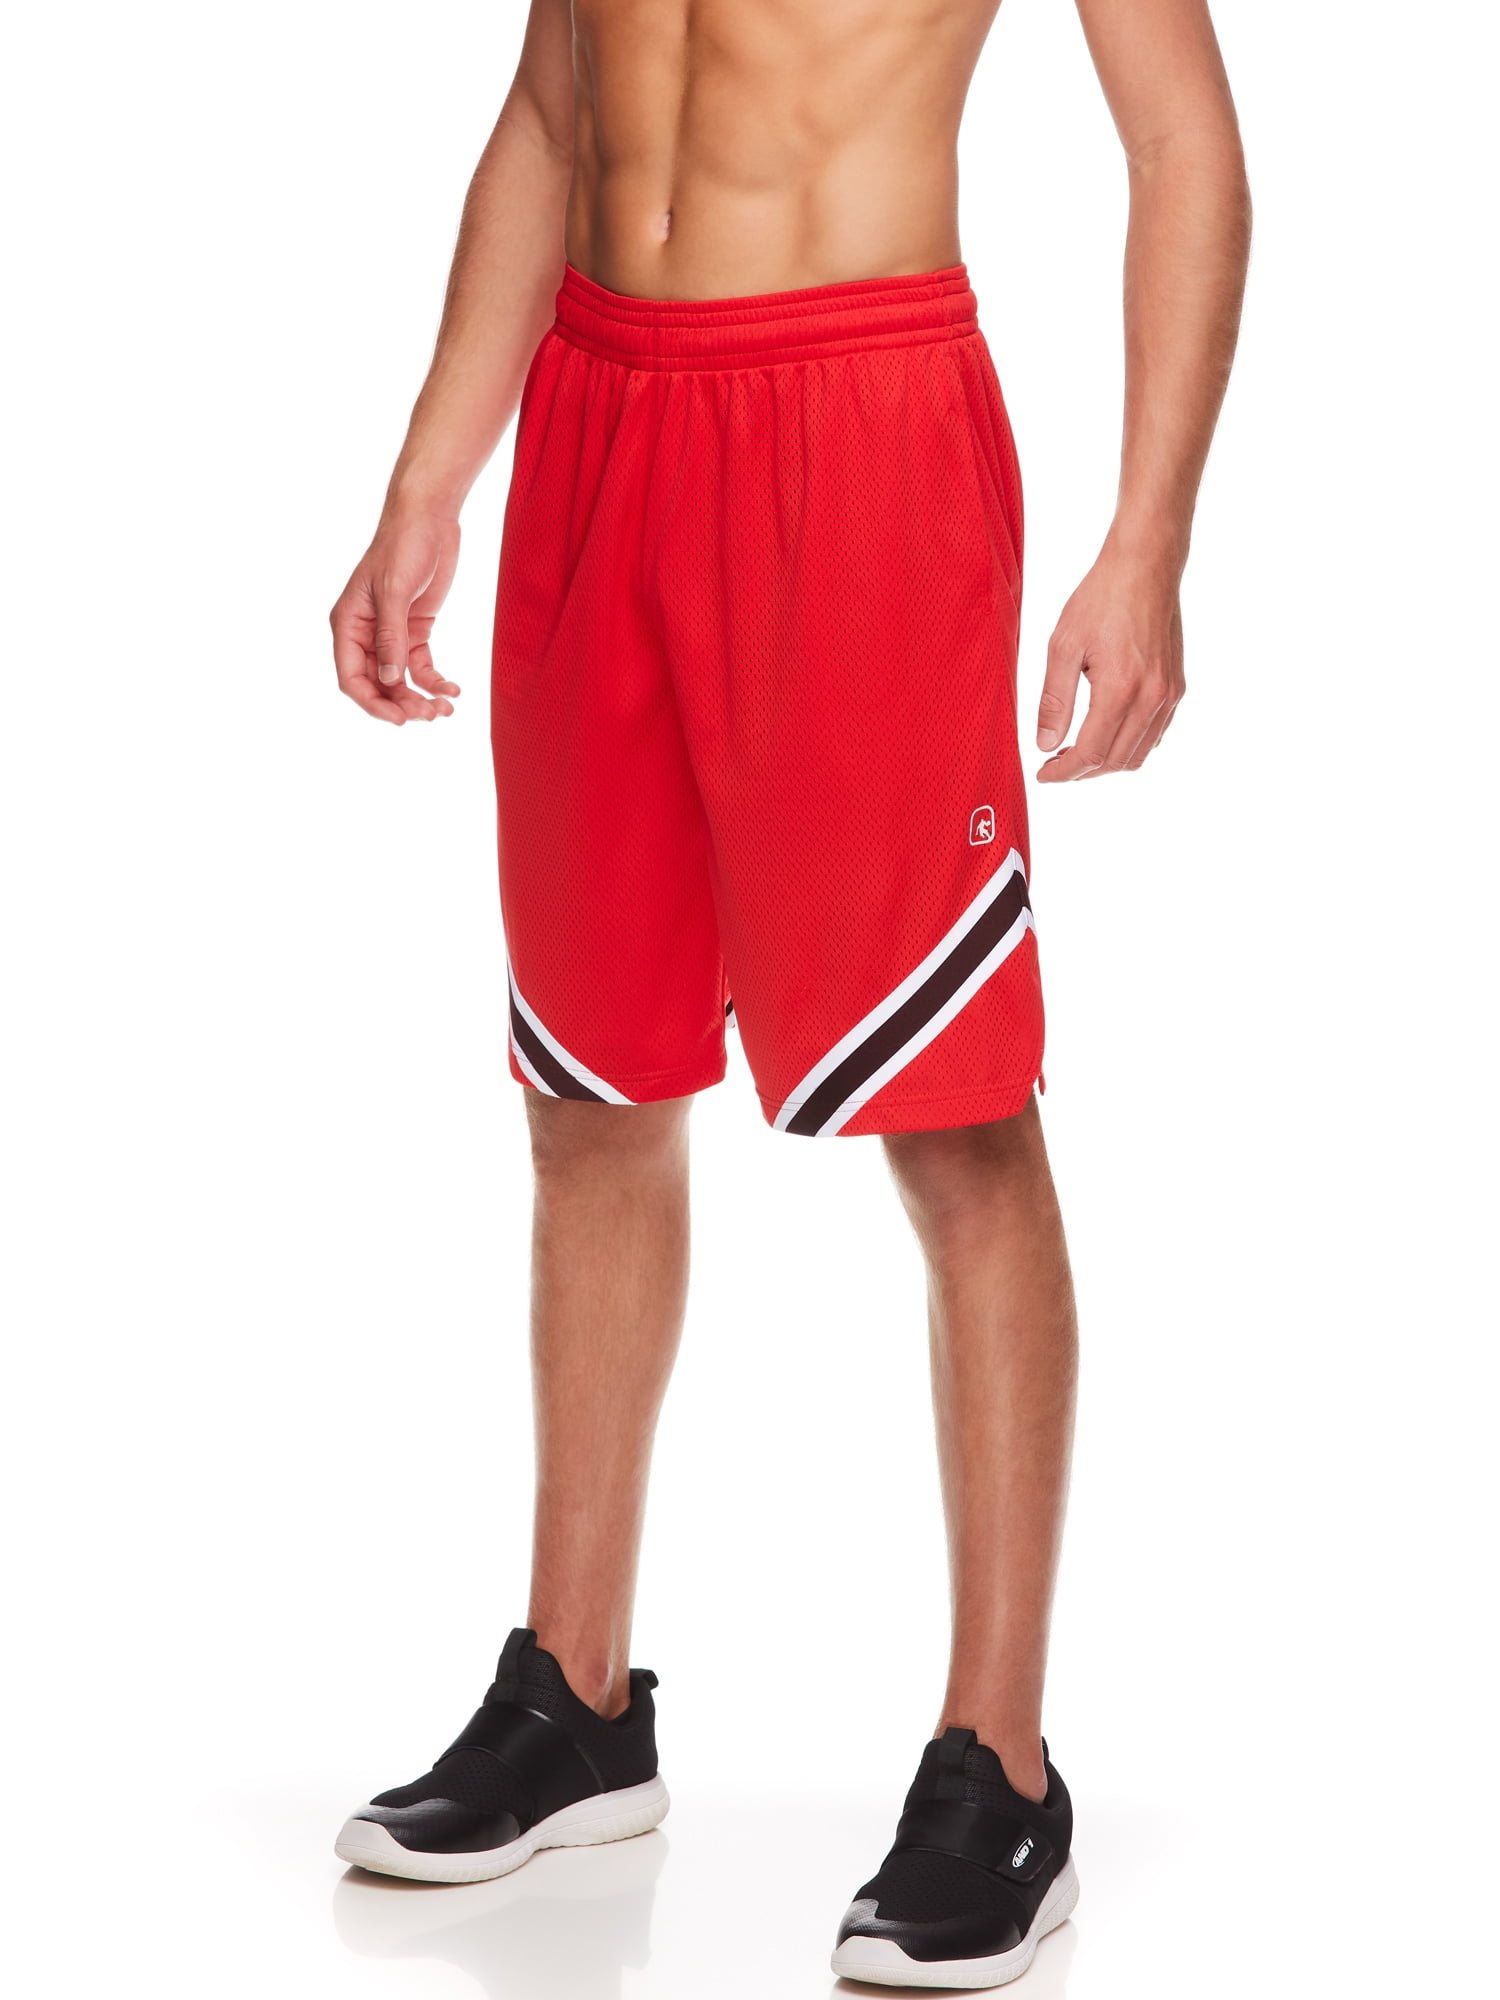 Details about   **** New Mens Basketball Shorts by And1.**Adjustable Elastic Waist Size S.****